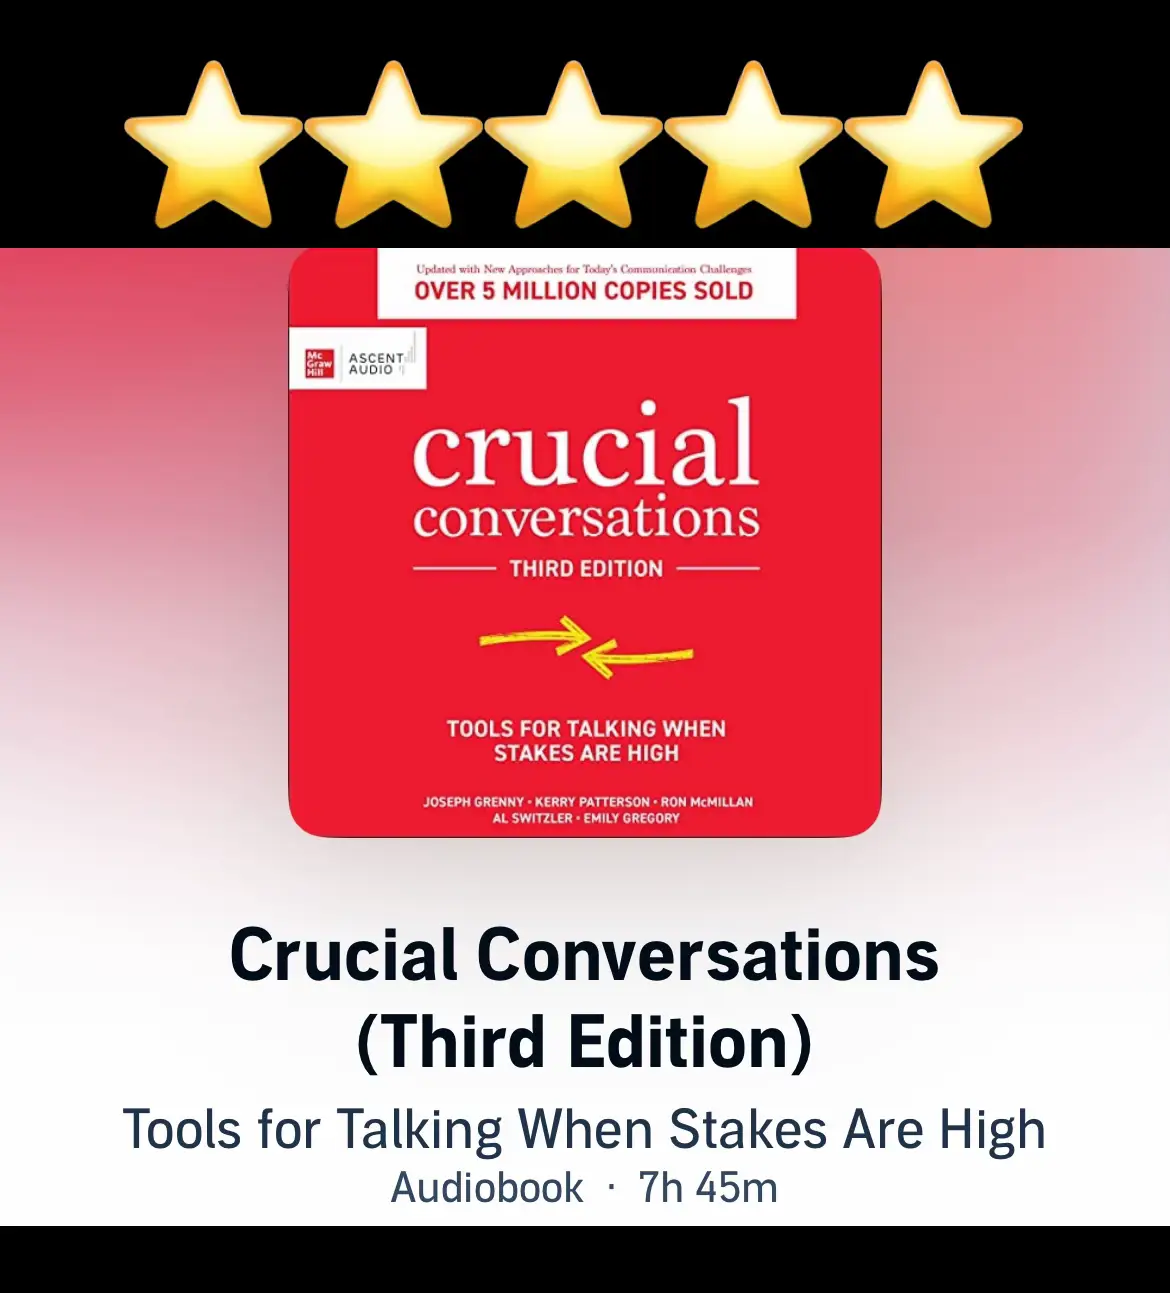 Crucial Conversations (Third Edition) by Joseph Grenny, Kerry Patterson,  Ron McMillan, Al Switzler, Emily Gregory - Audiobook 